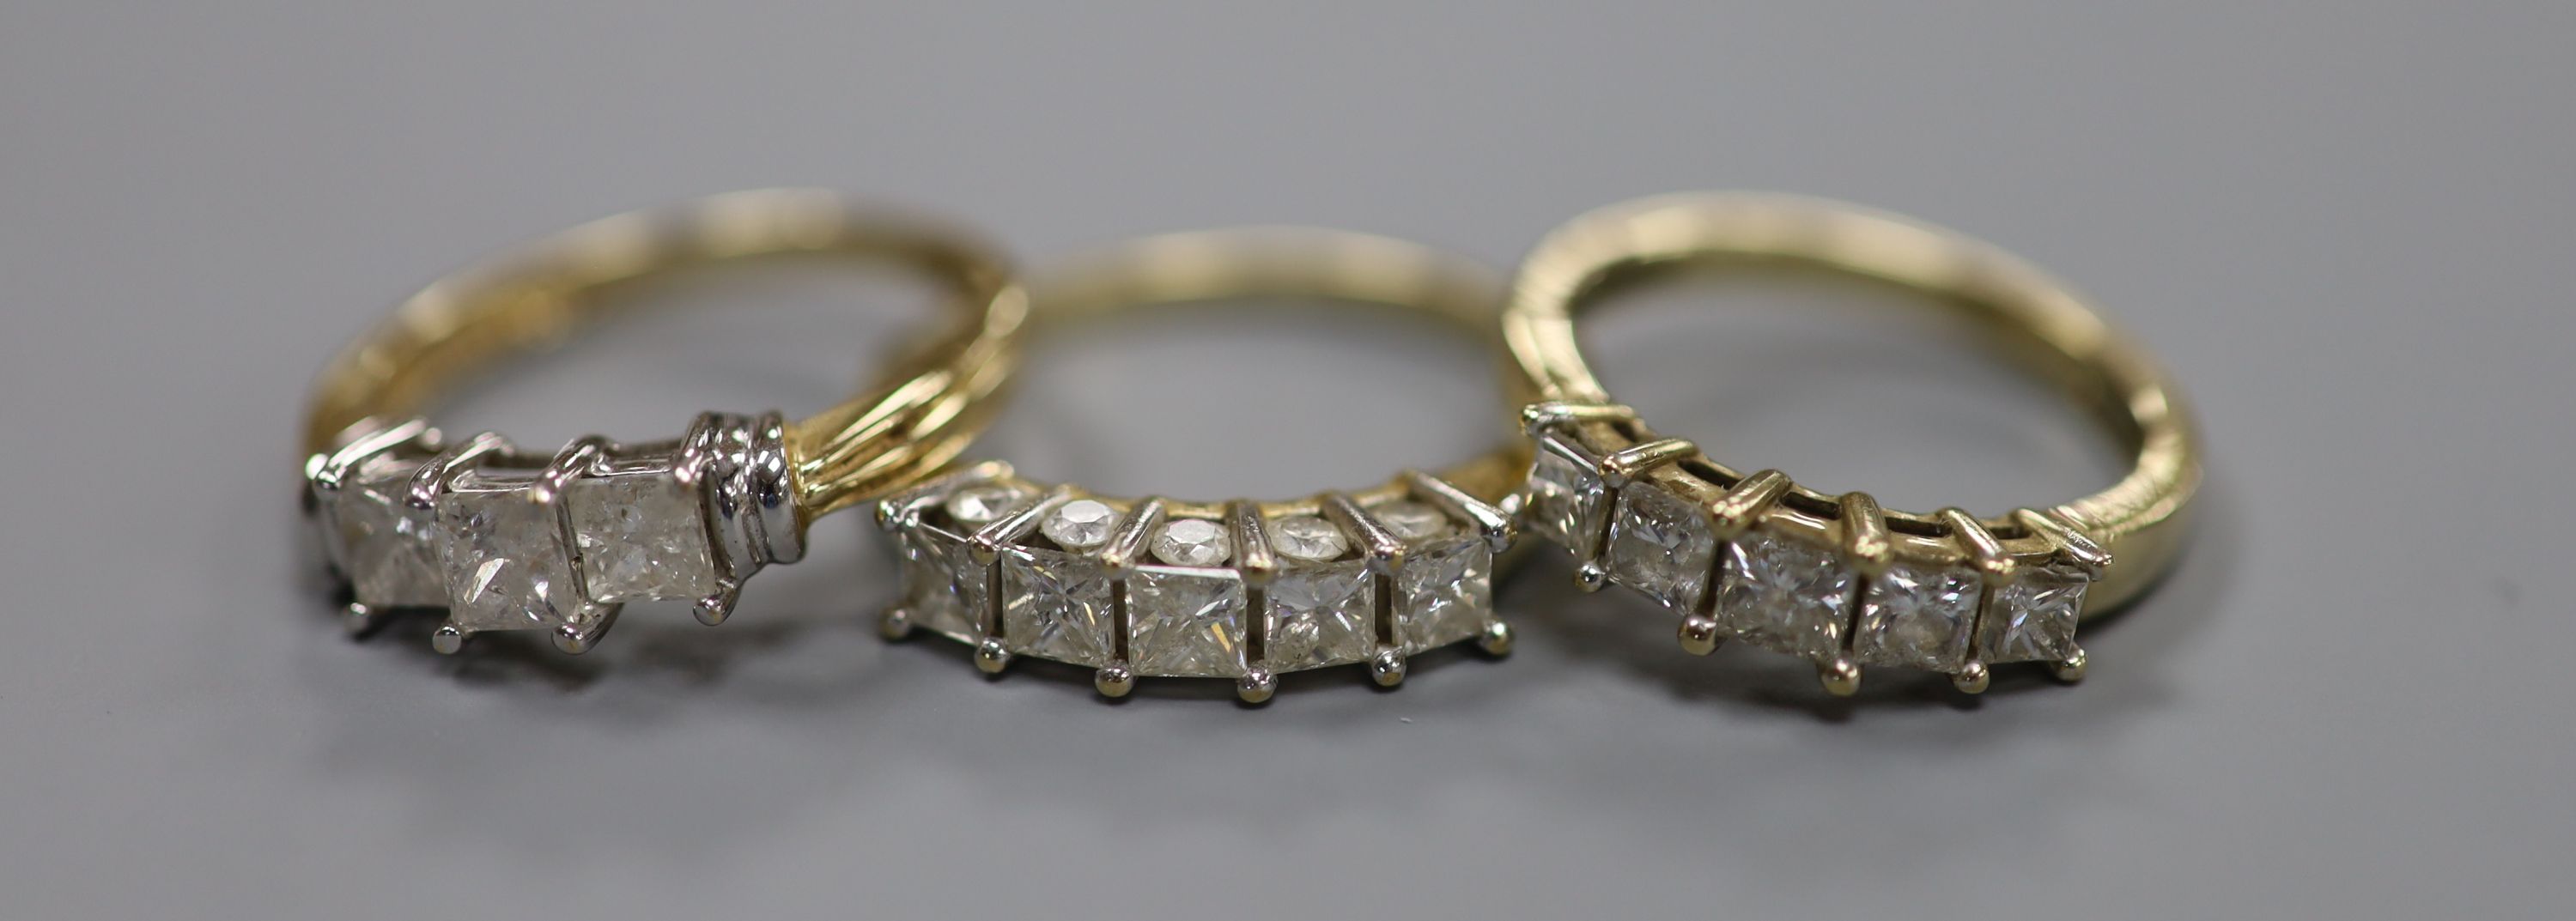 Two modern 9ct gold and five stone diamond set half hoop rings, sizes N & R/S gross 6.4 grams and a similar 14ct gold and three stone diamond ring, size P, gross 2.7 grams.